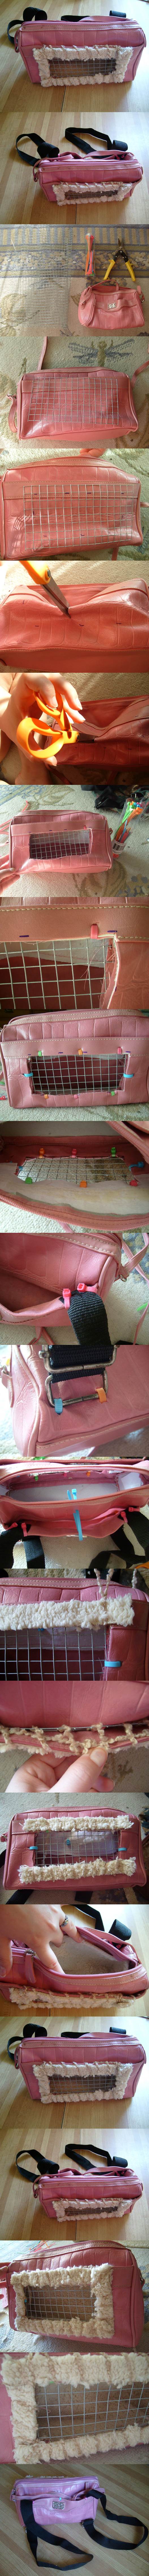 DIY Recycled Small Pet Carrier Backpack 2